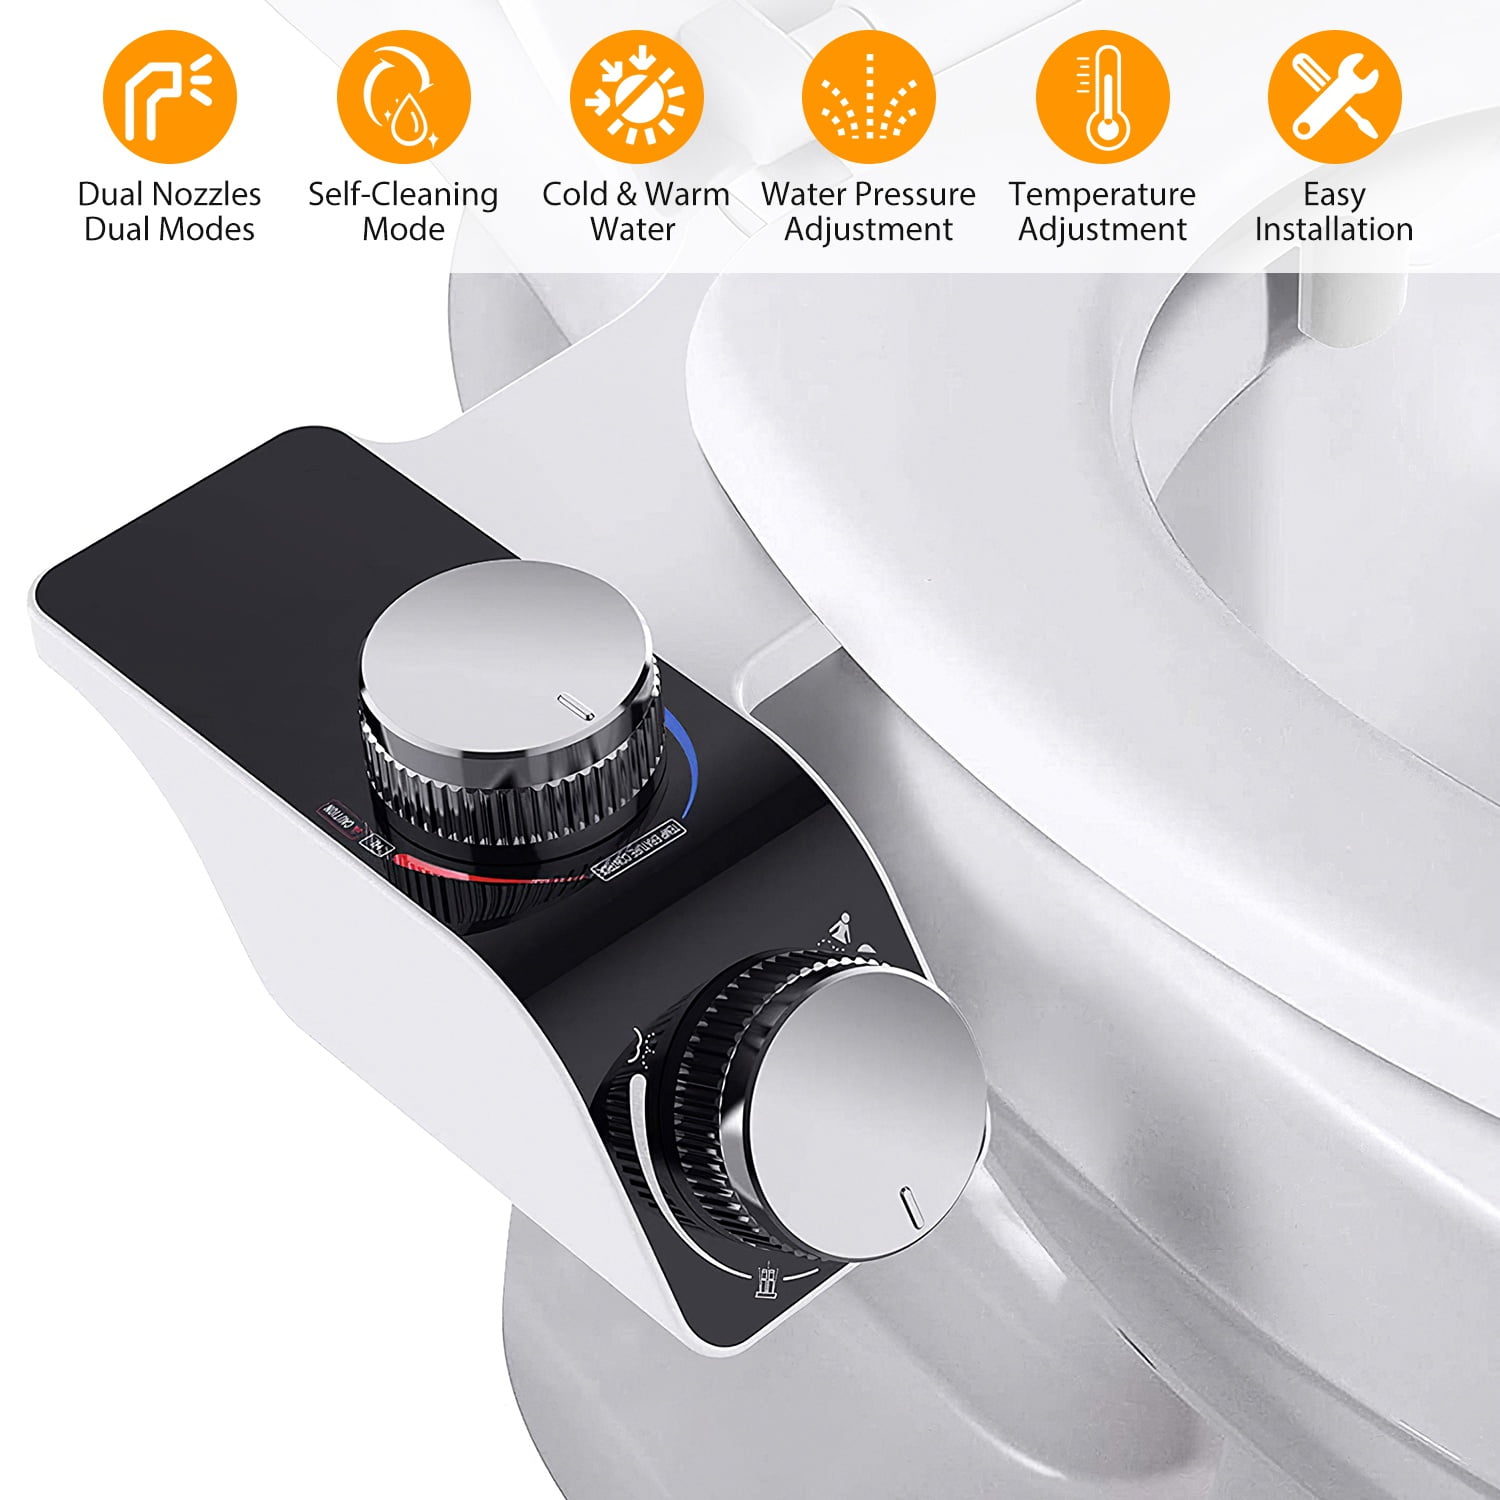 iMounTEK Bidet Attachment for Toilet -Self Cleaning Dual Nozzle, Cold ...